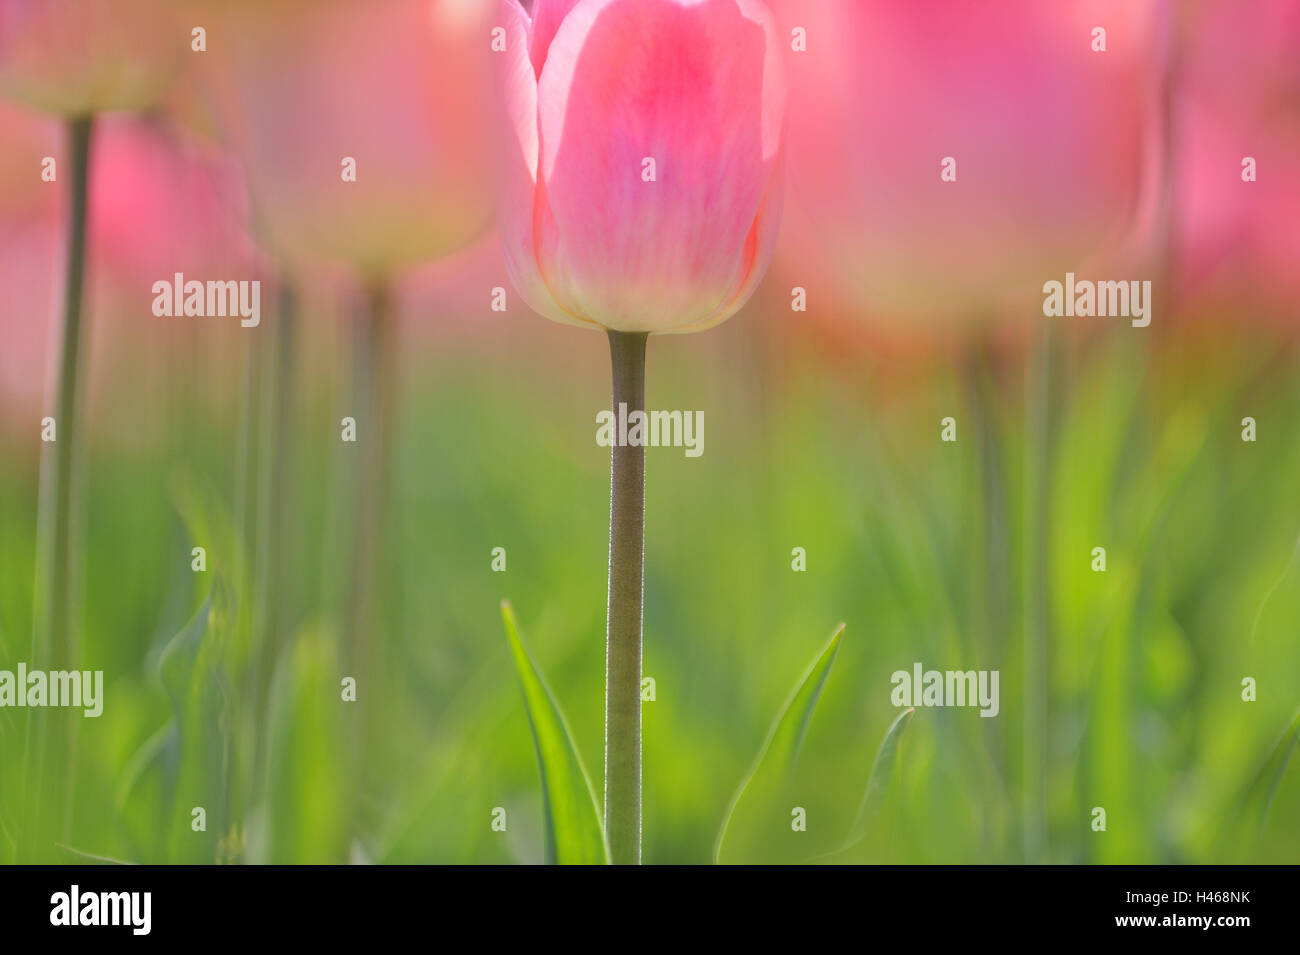 Tulips, blossoms, pink, blossom, blur, Tulpia, blossom, blossoms, petals, flowers, spring flowers, botany, detail, blossom, flora, lily plants, nature, plants, tulip blossoms, Stock Photo